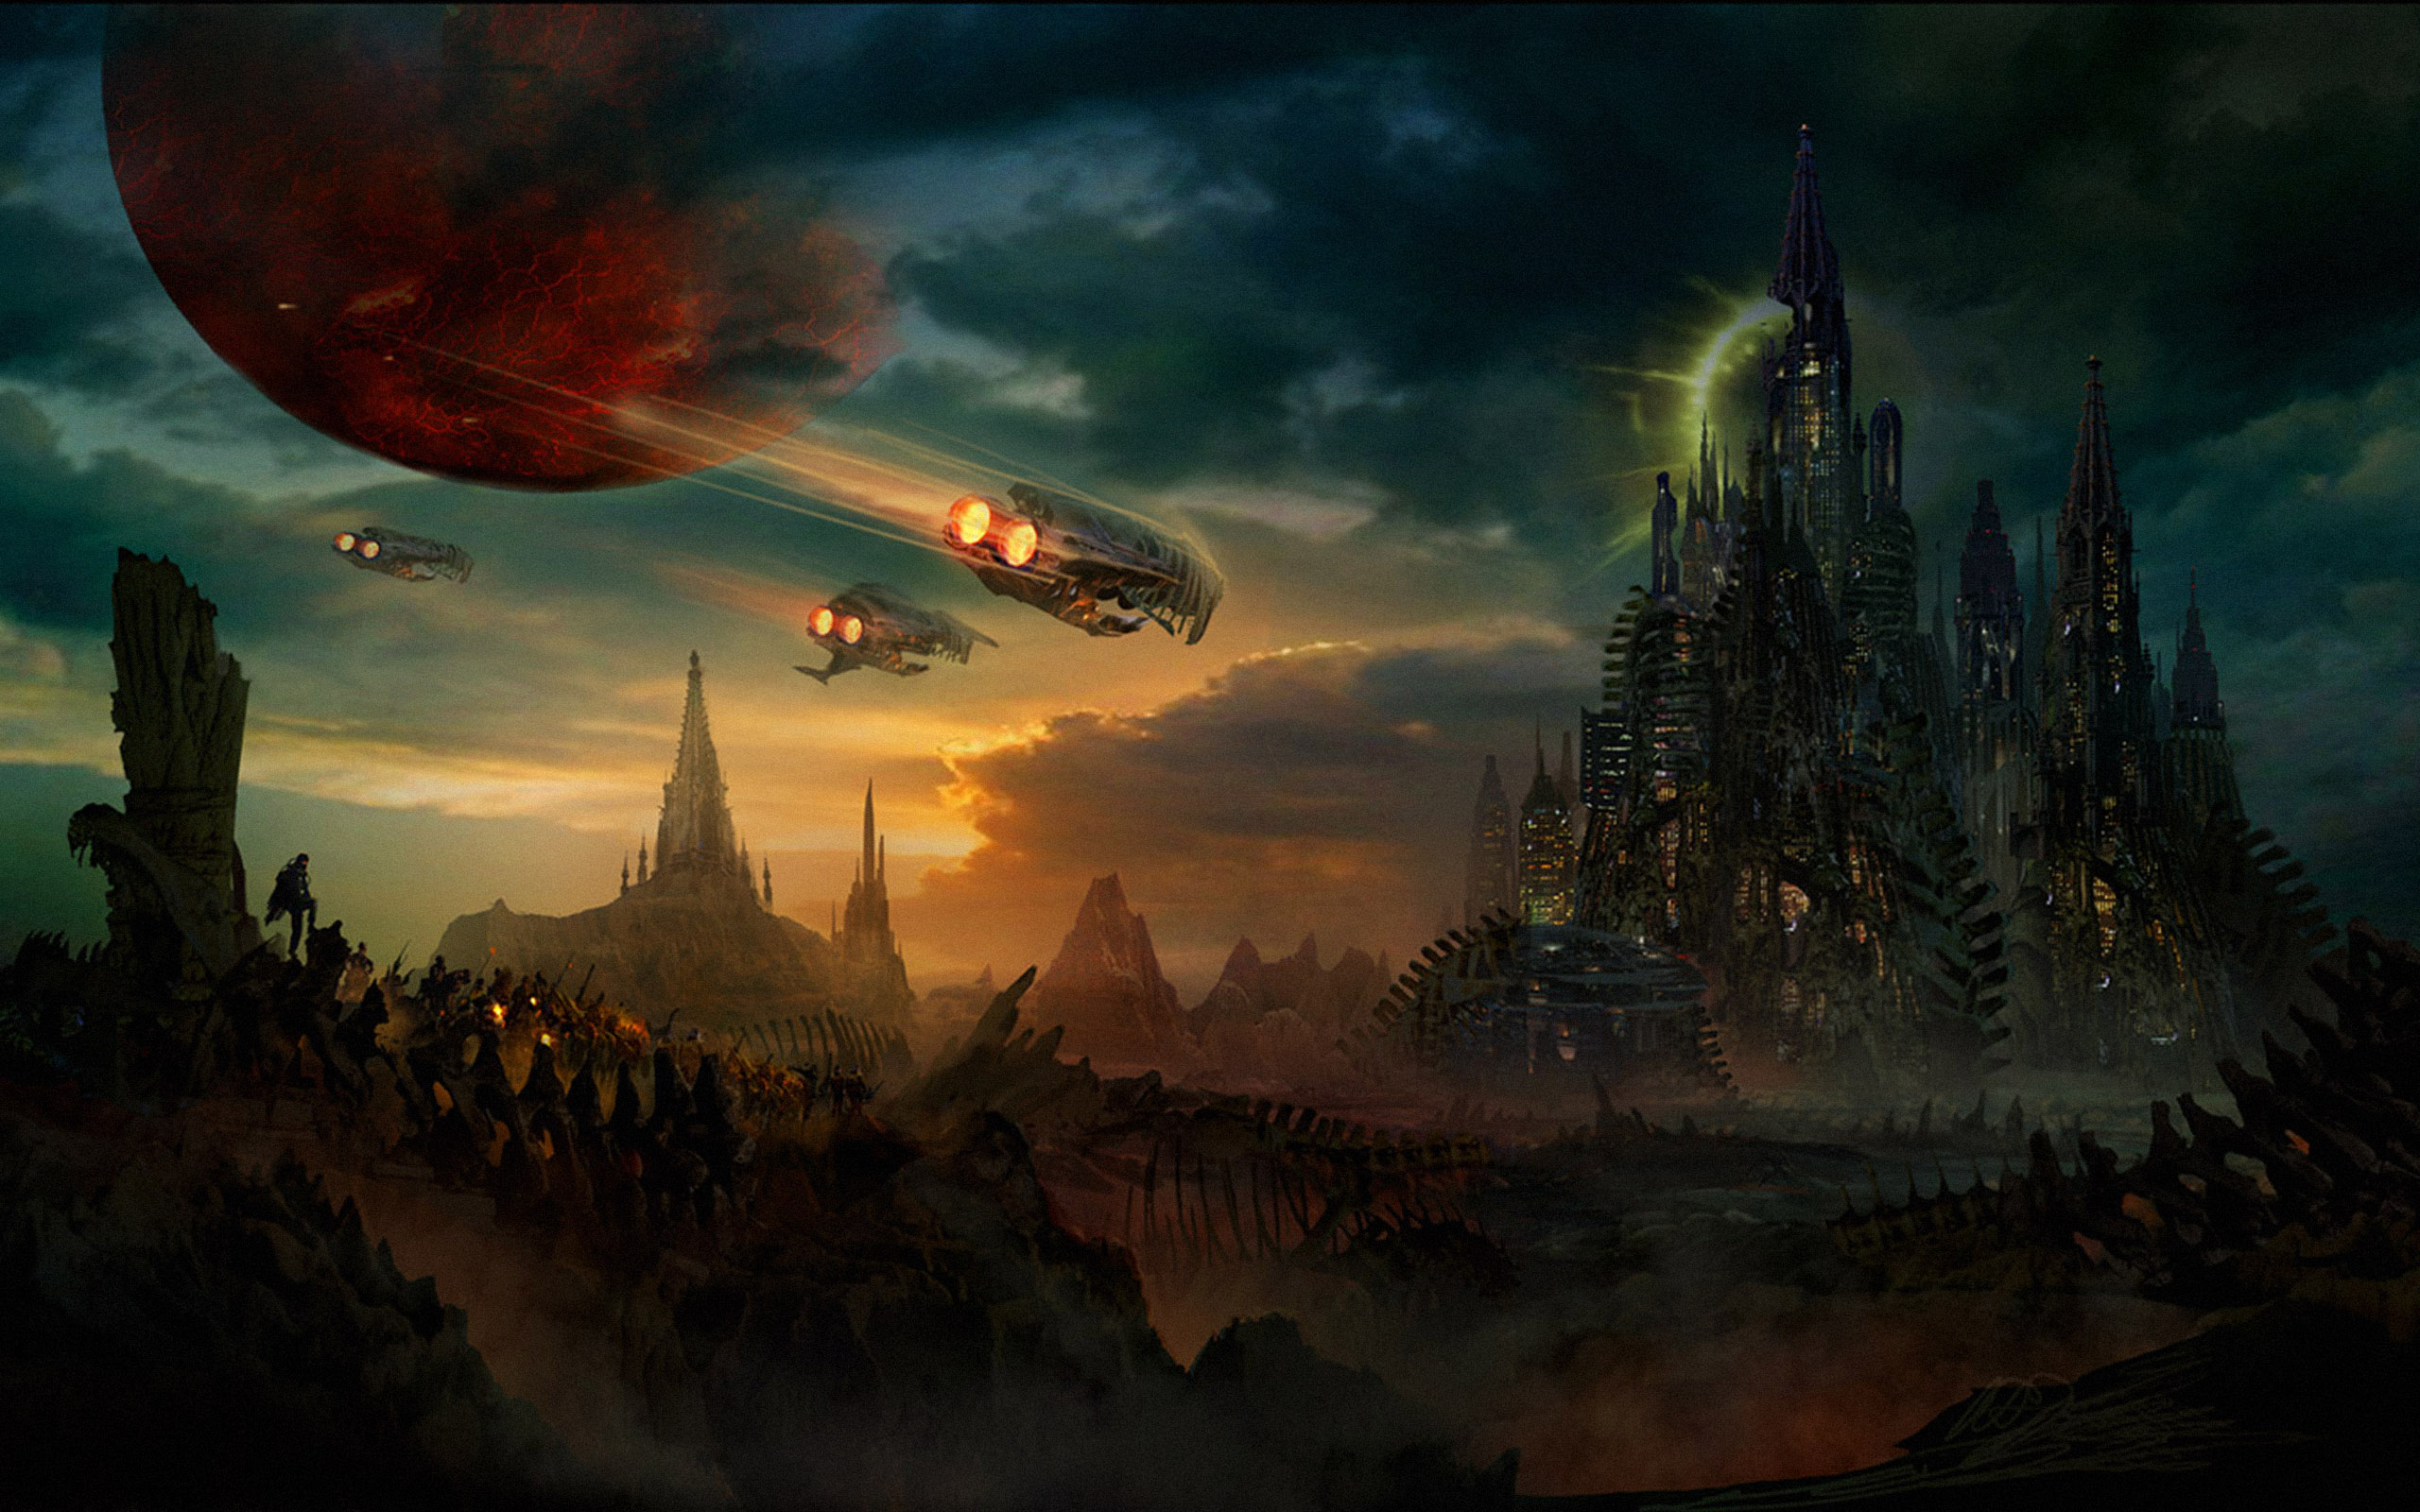 sci fi wallpaper,action adventure game,sky,strategy video game,cg artwork,pc game